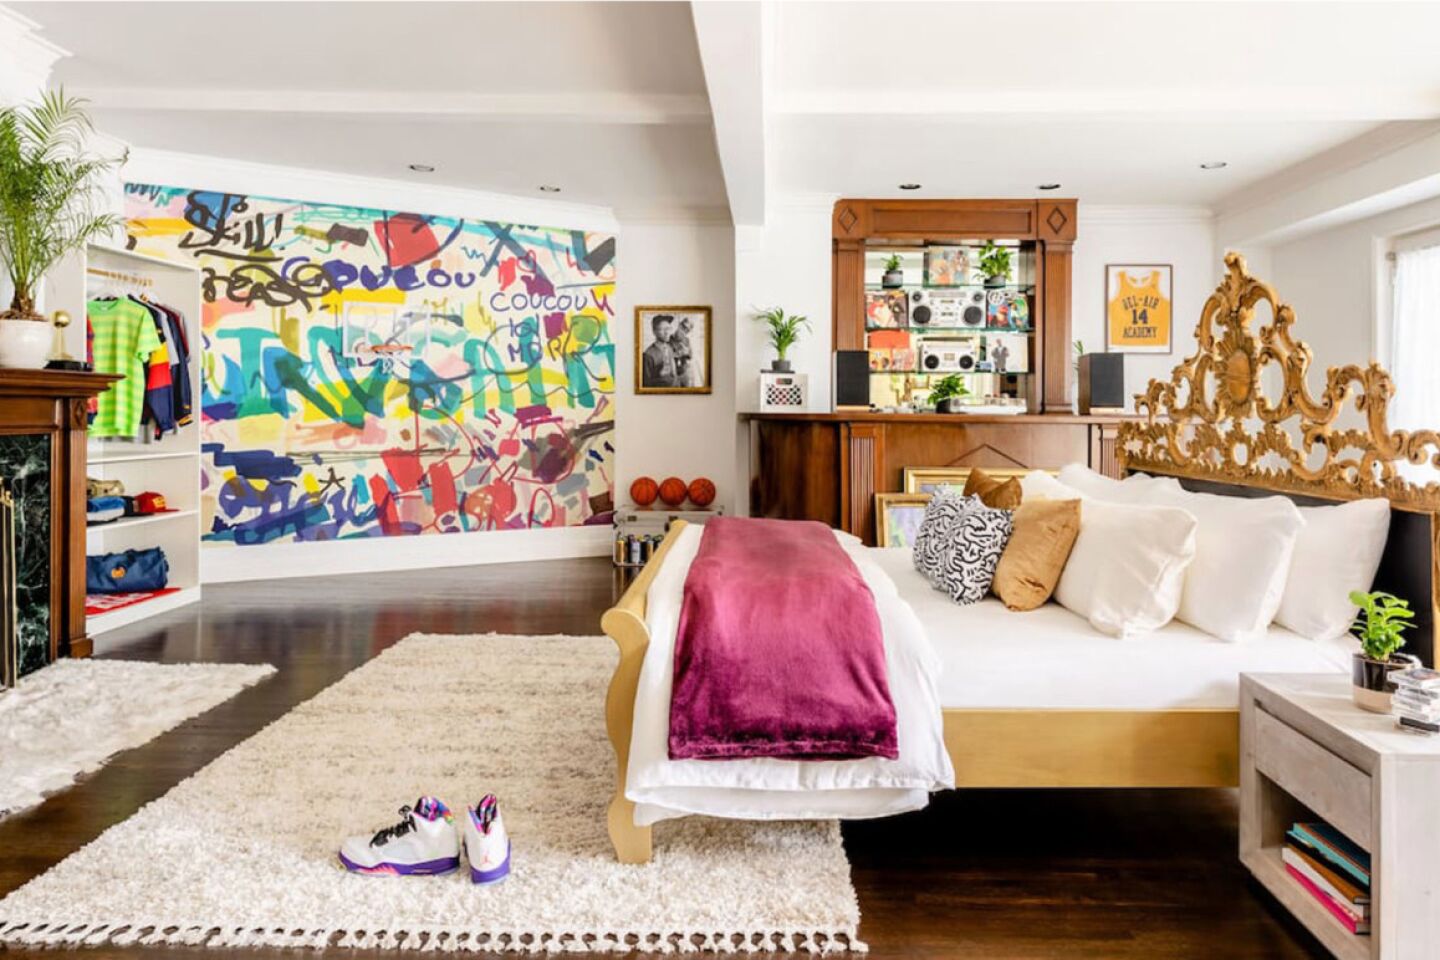 'Fresh Prince of Bel-Air' mansion: the bedroom